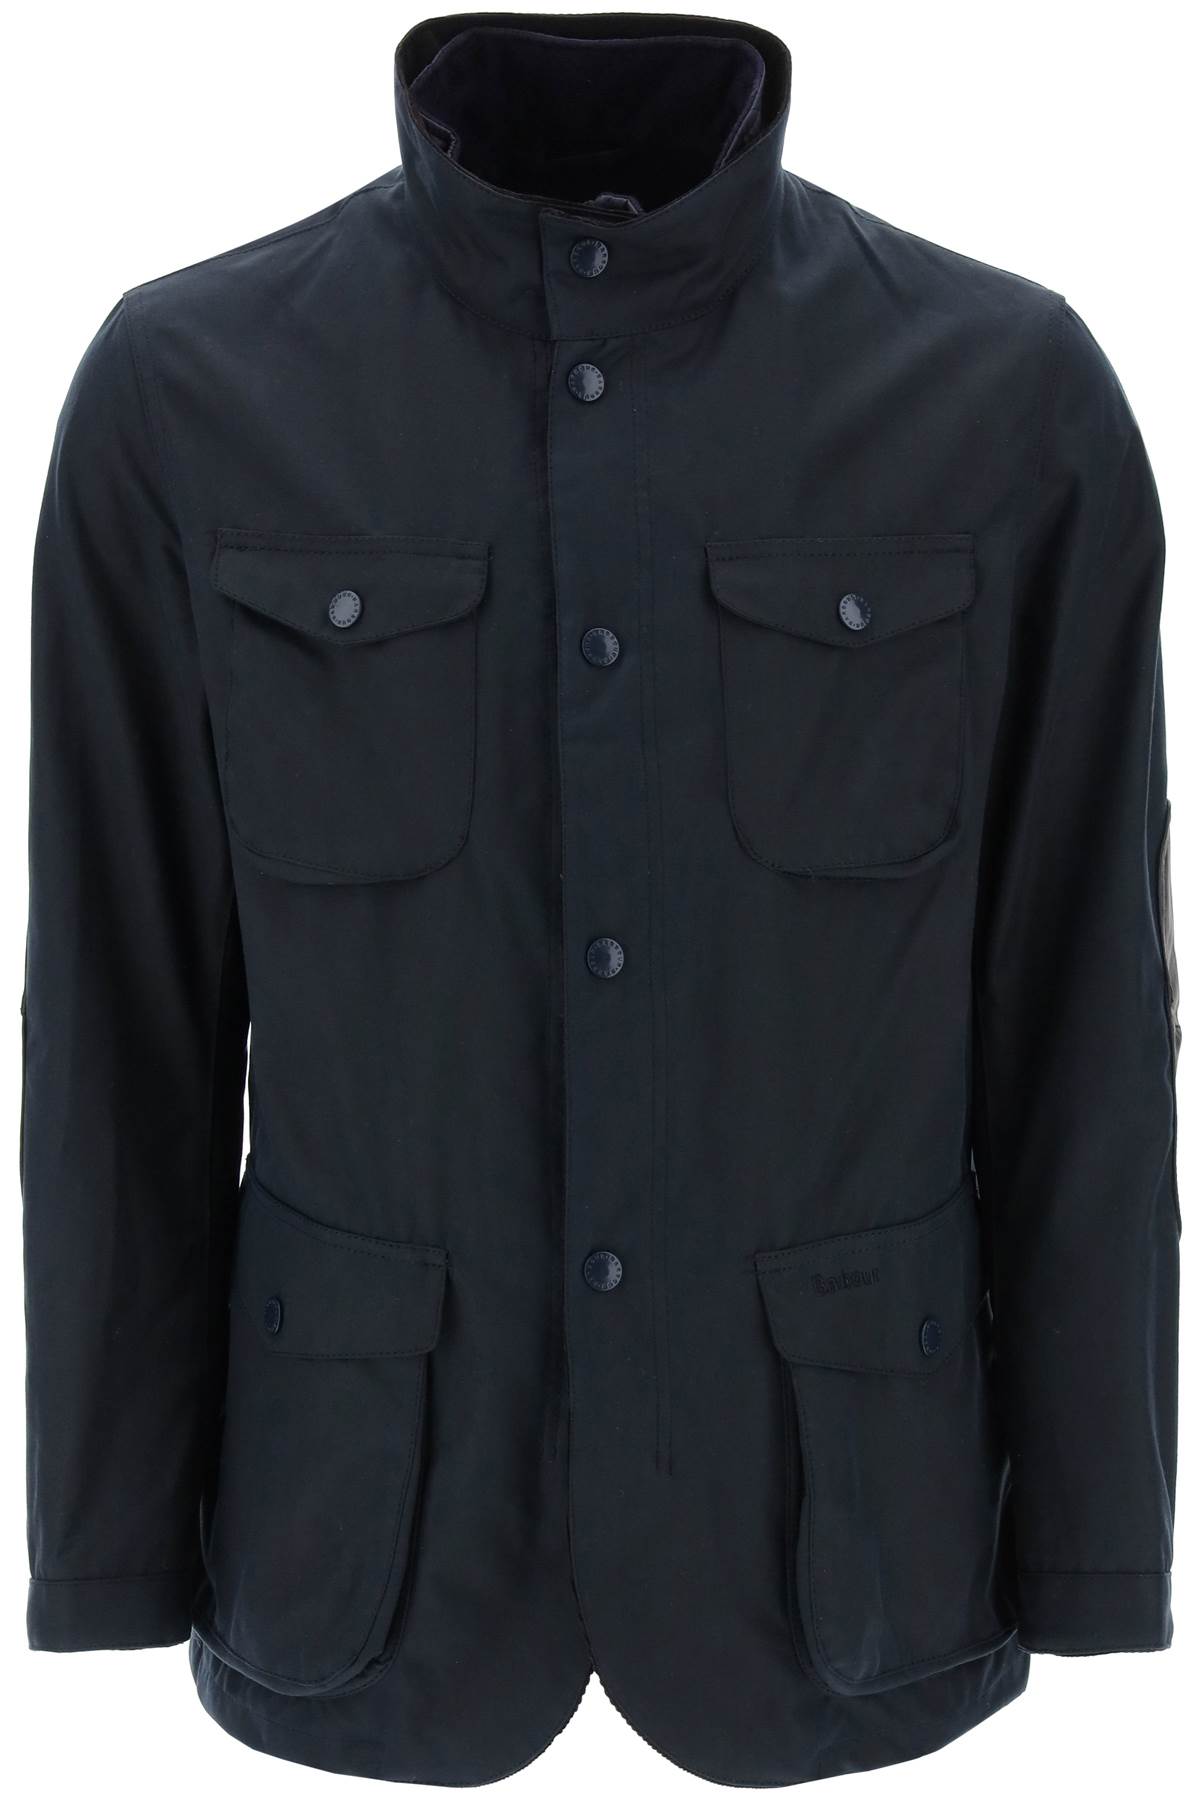 BARBOUR OGSTON WAXED JACKET